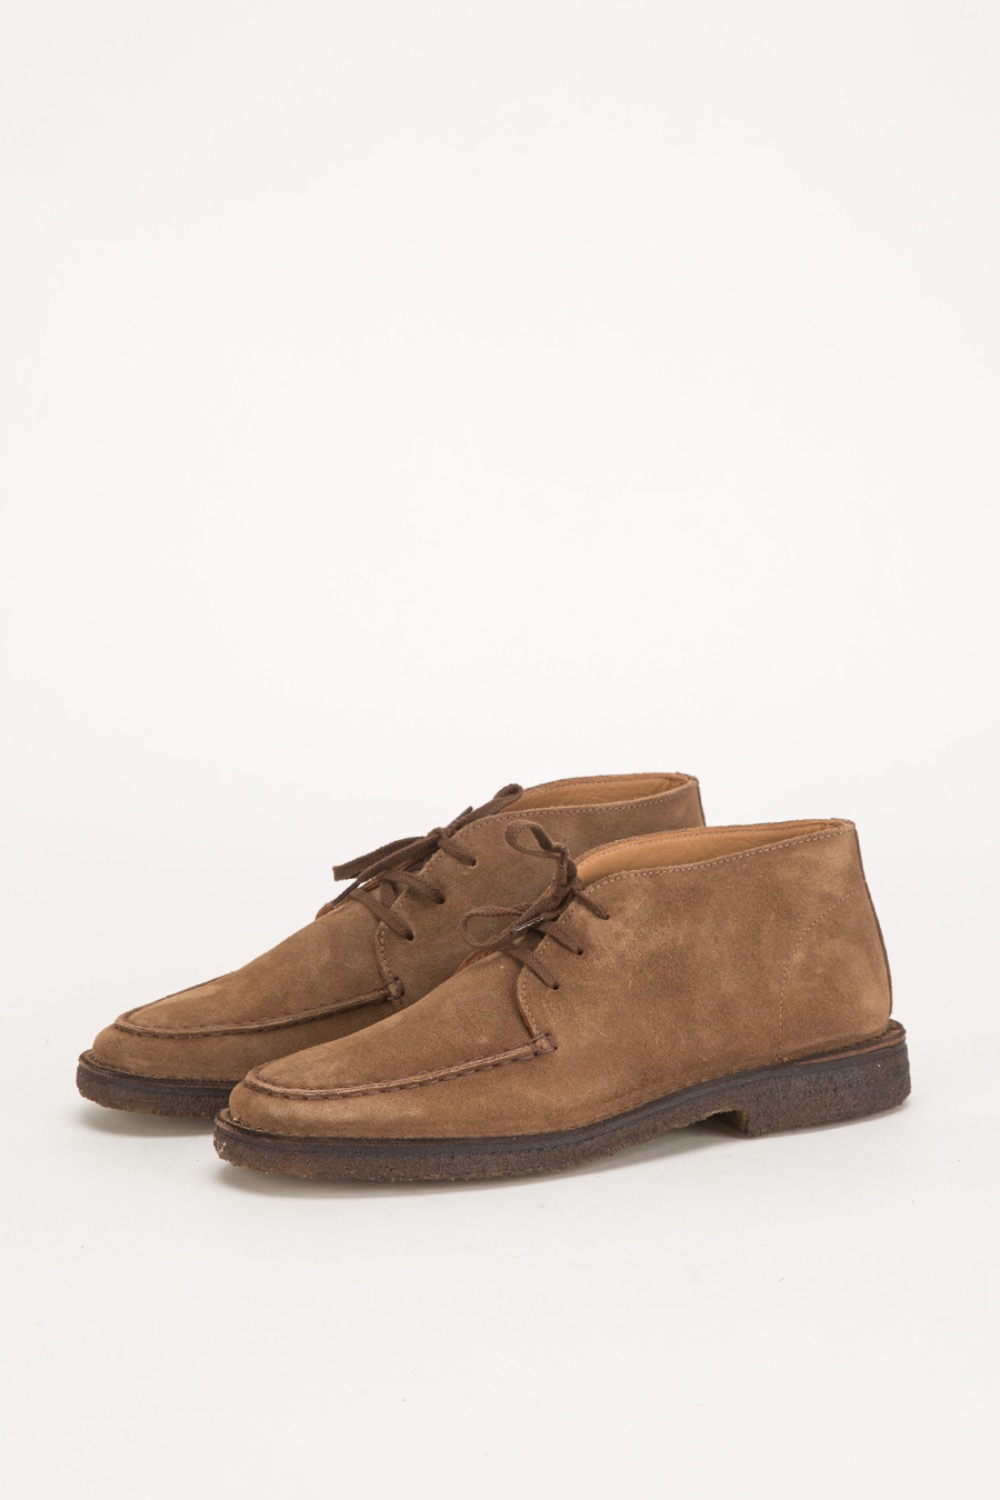 (CARRY OVER)CROSBY MOC-TOE CHUKKA BOOT  (Tobacco) SUEDE